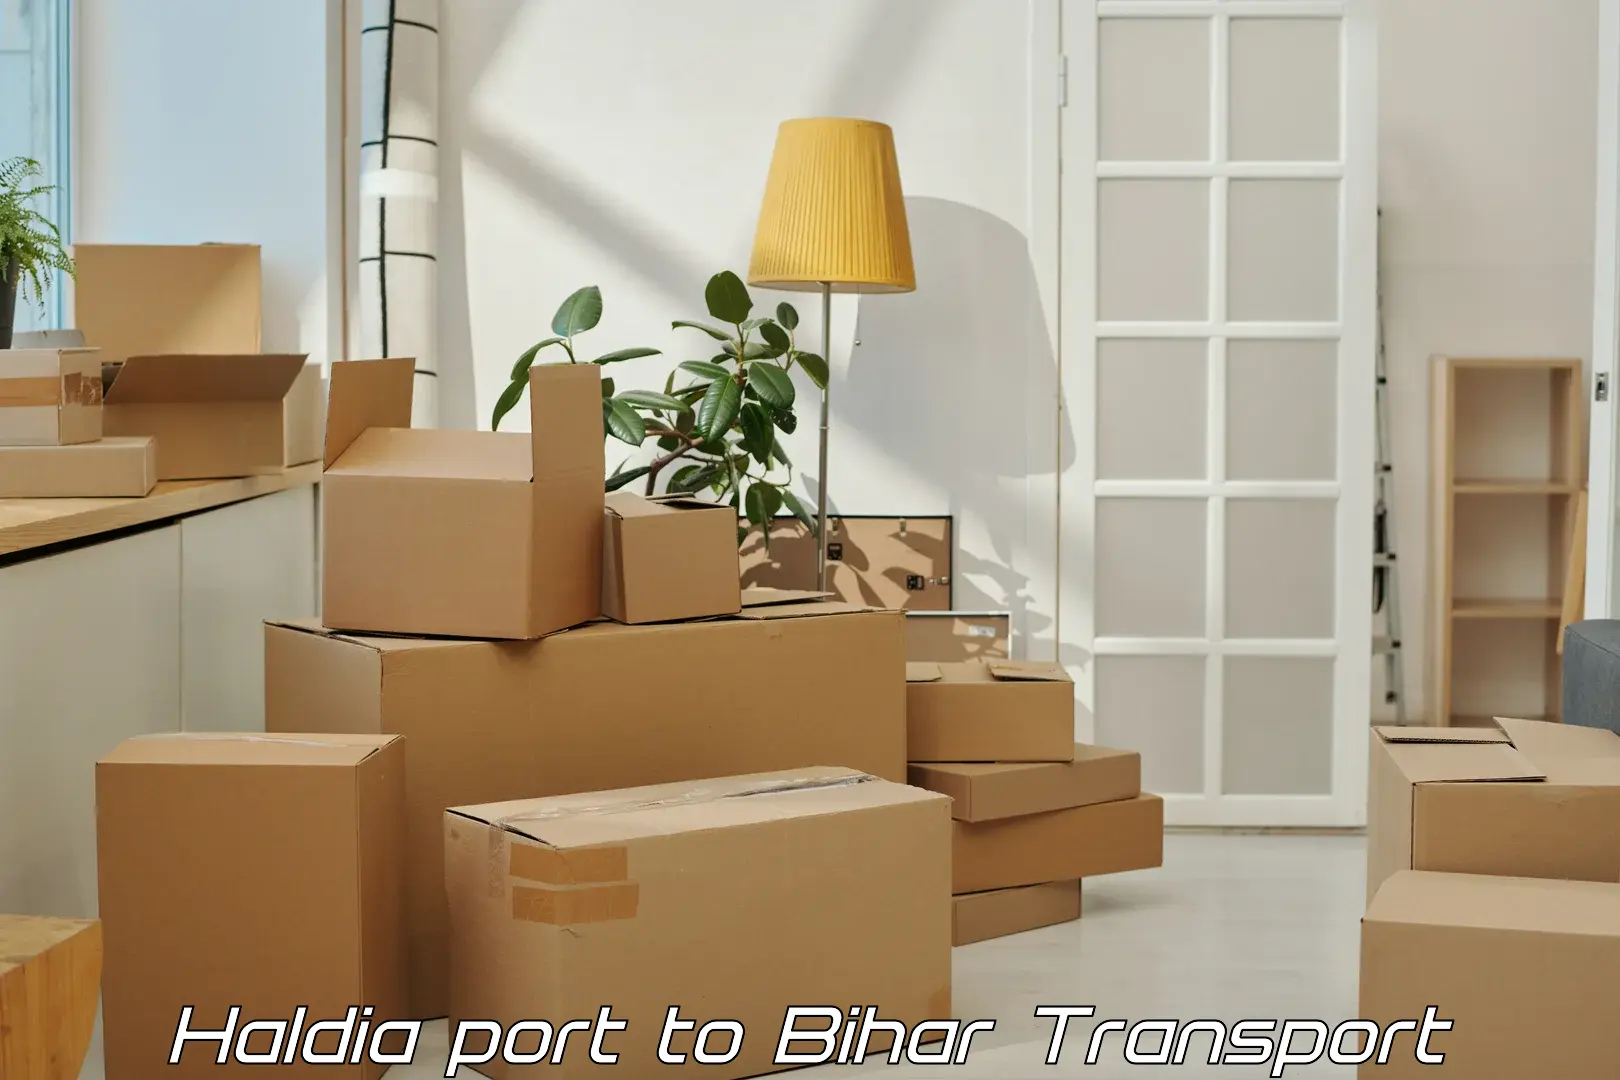 Transport bike from one state to another Haldia port to Bihar